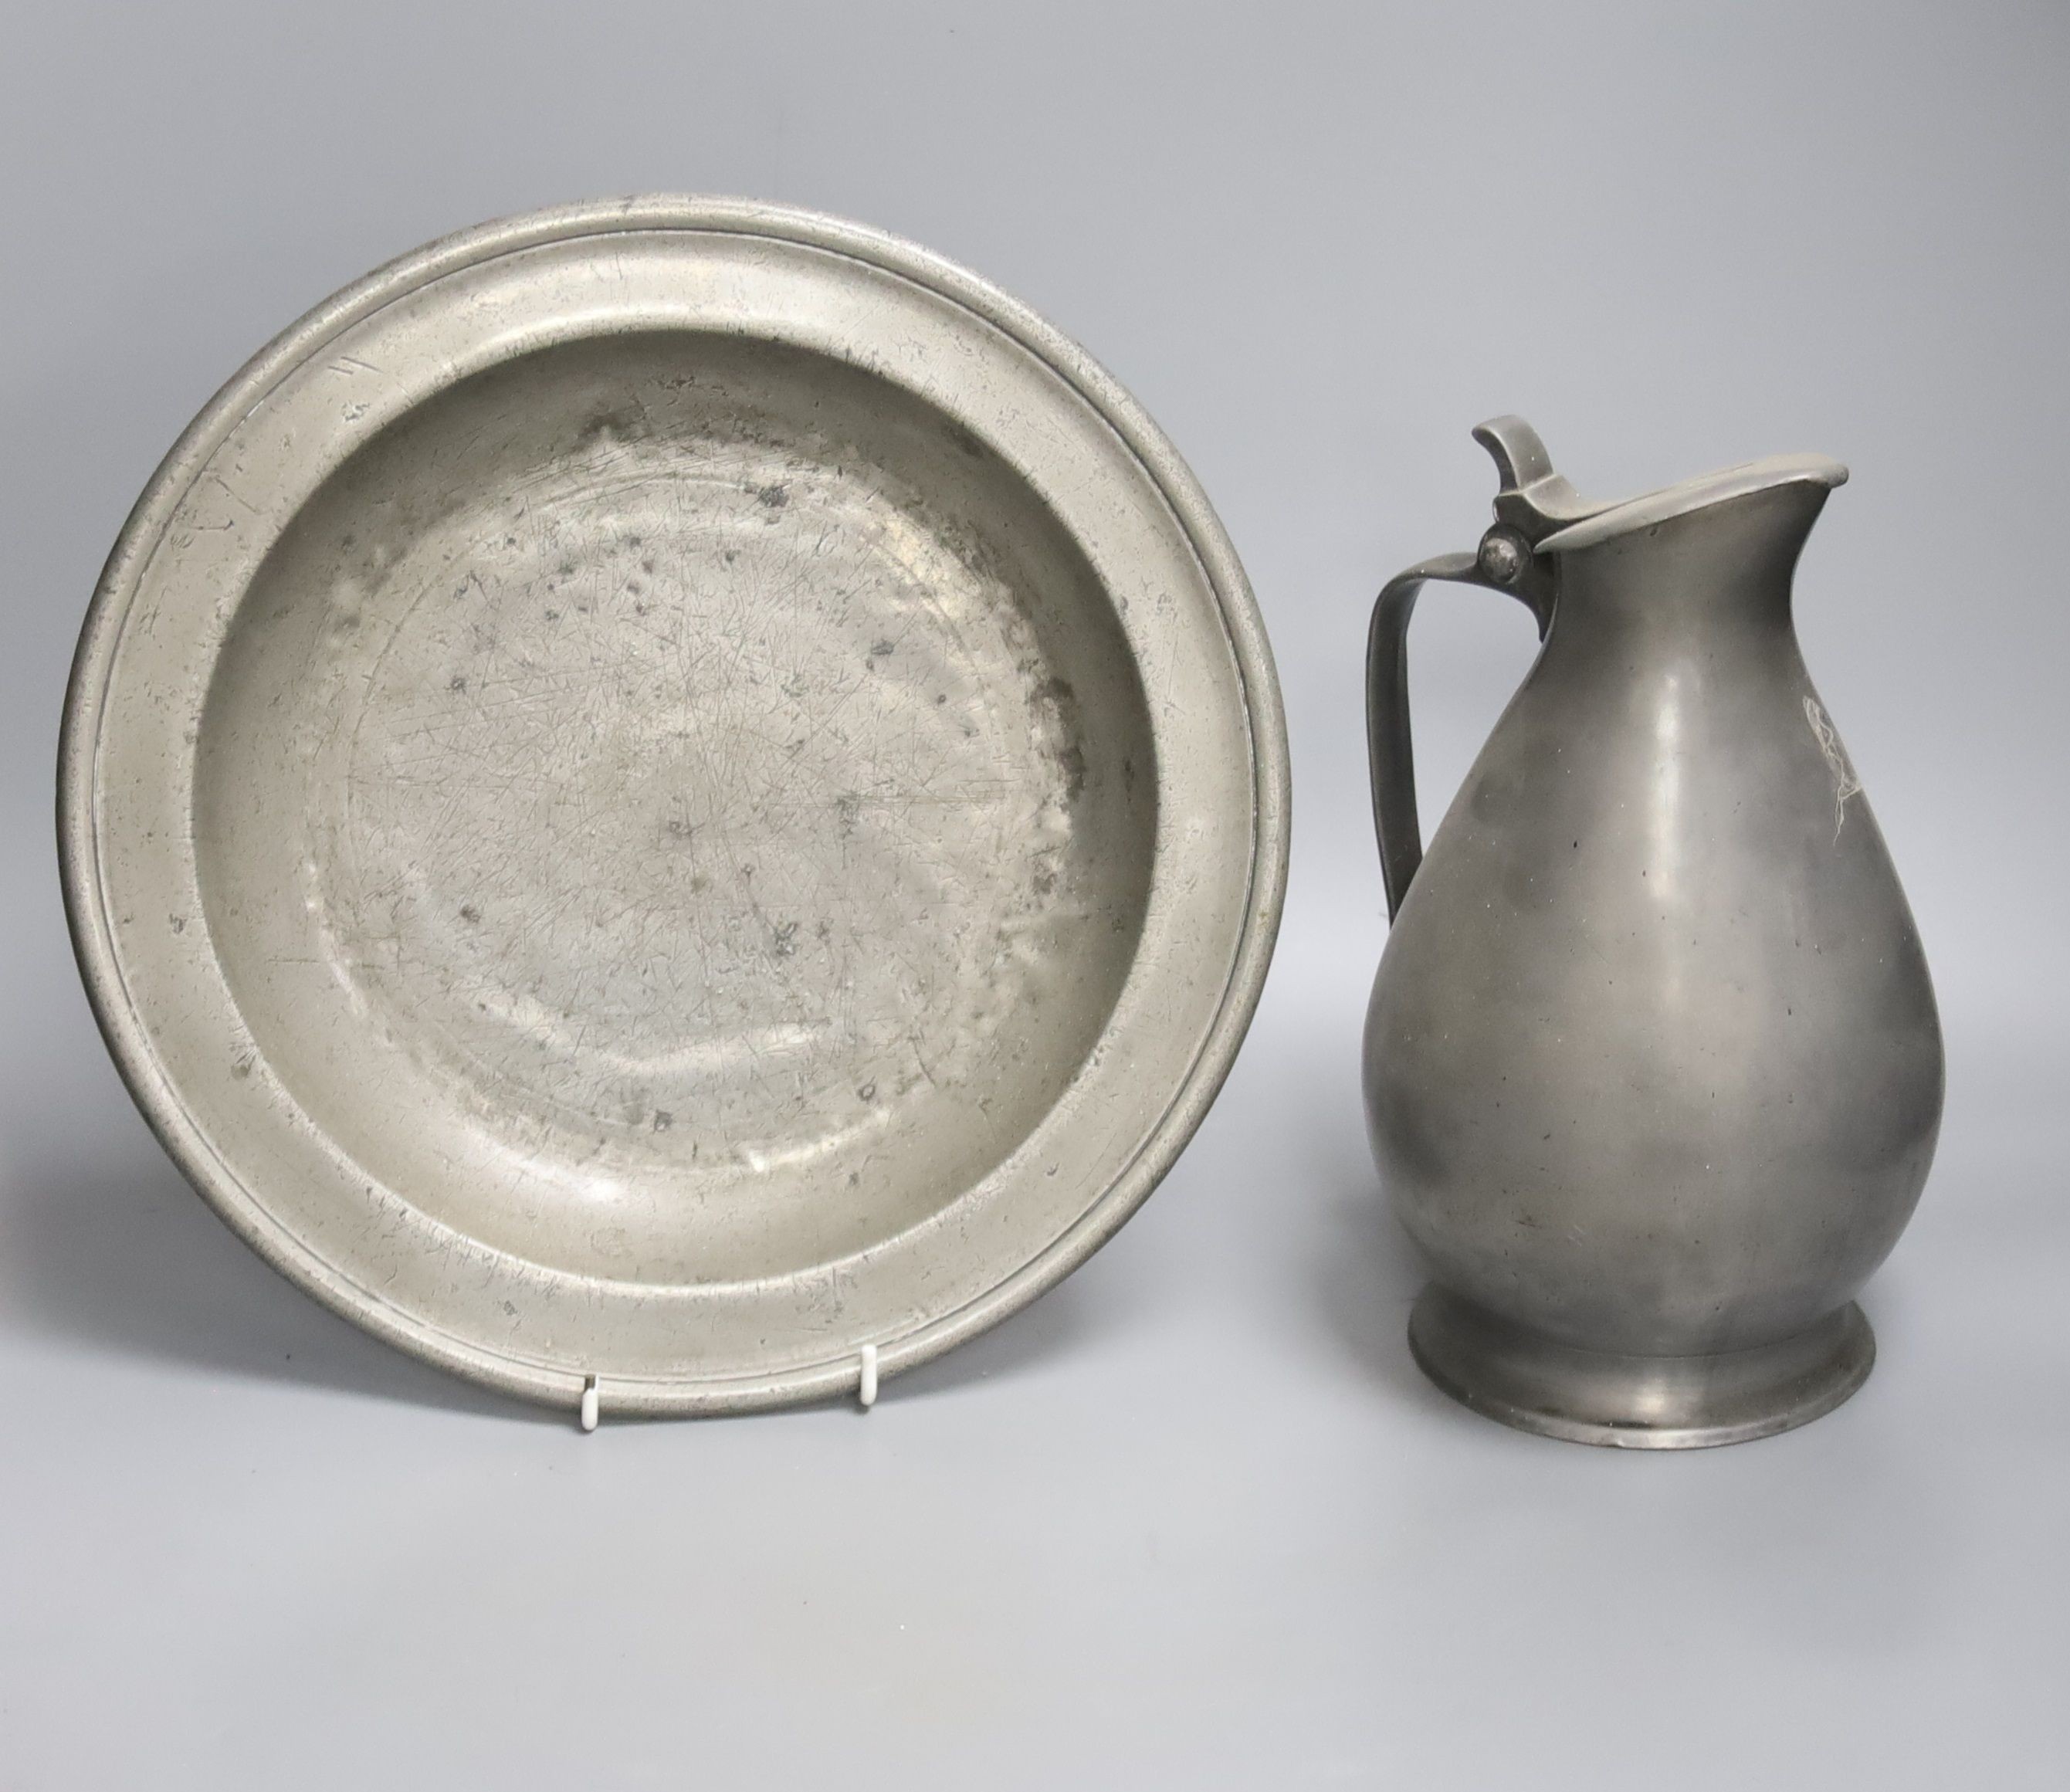 A pewter bowl with touchmark for Robert Baldwin, Wigan (circa 1690-1726) and a French pewter flagon of baluster form, 30cm